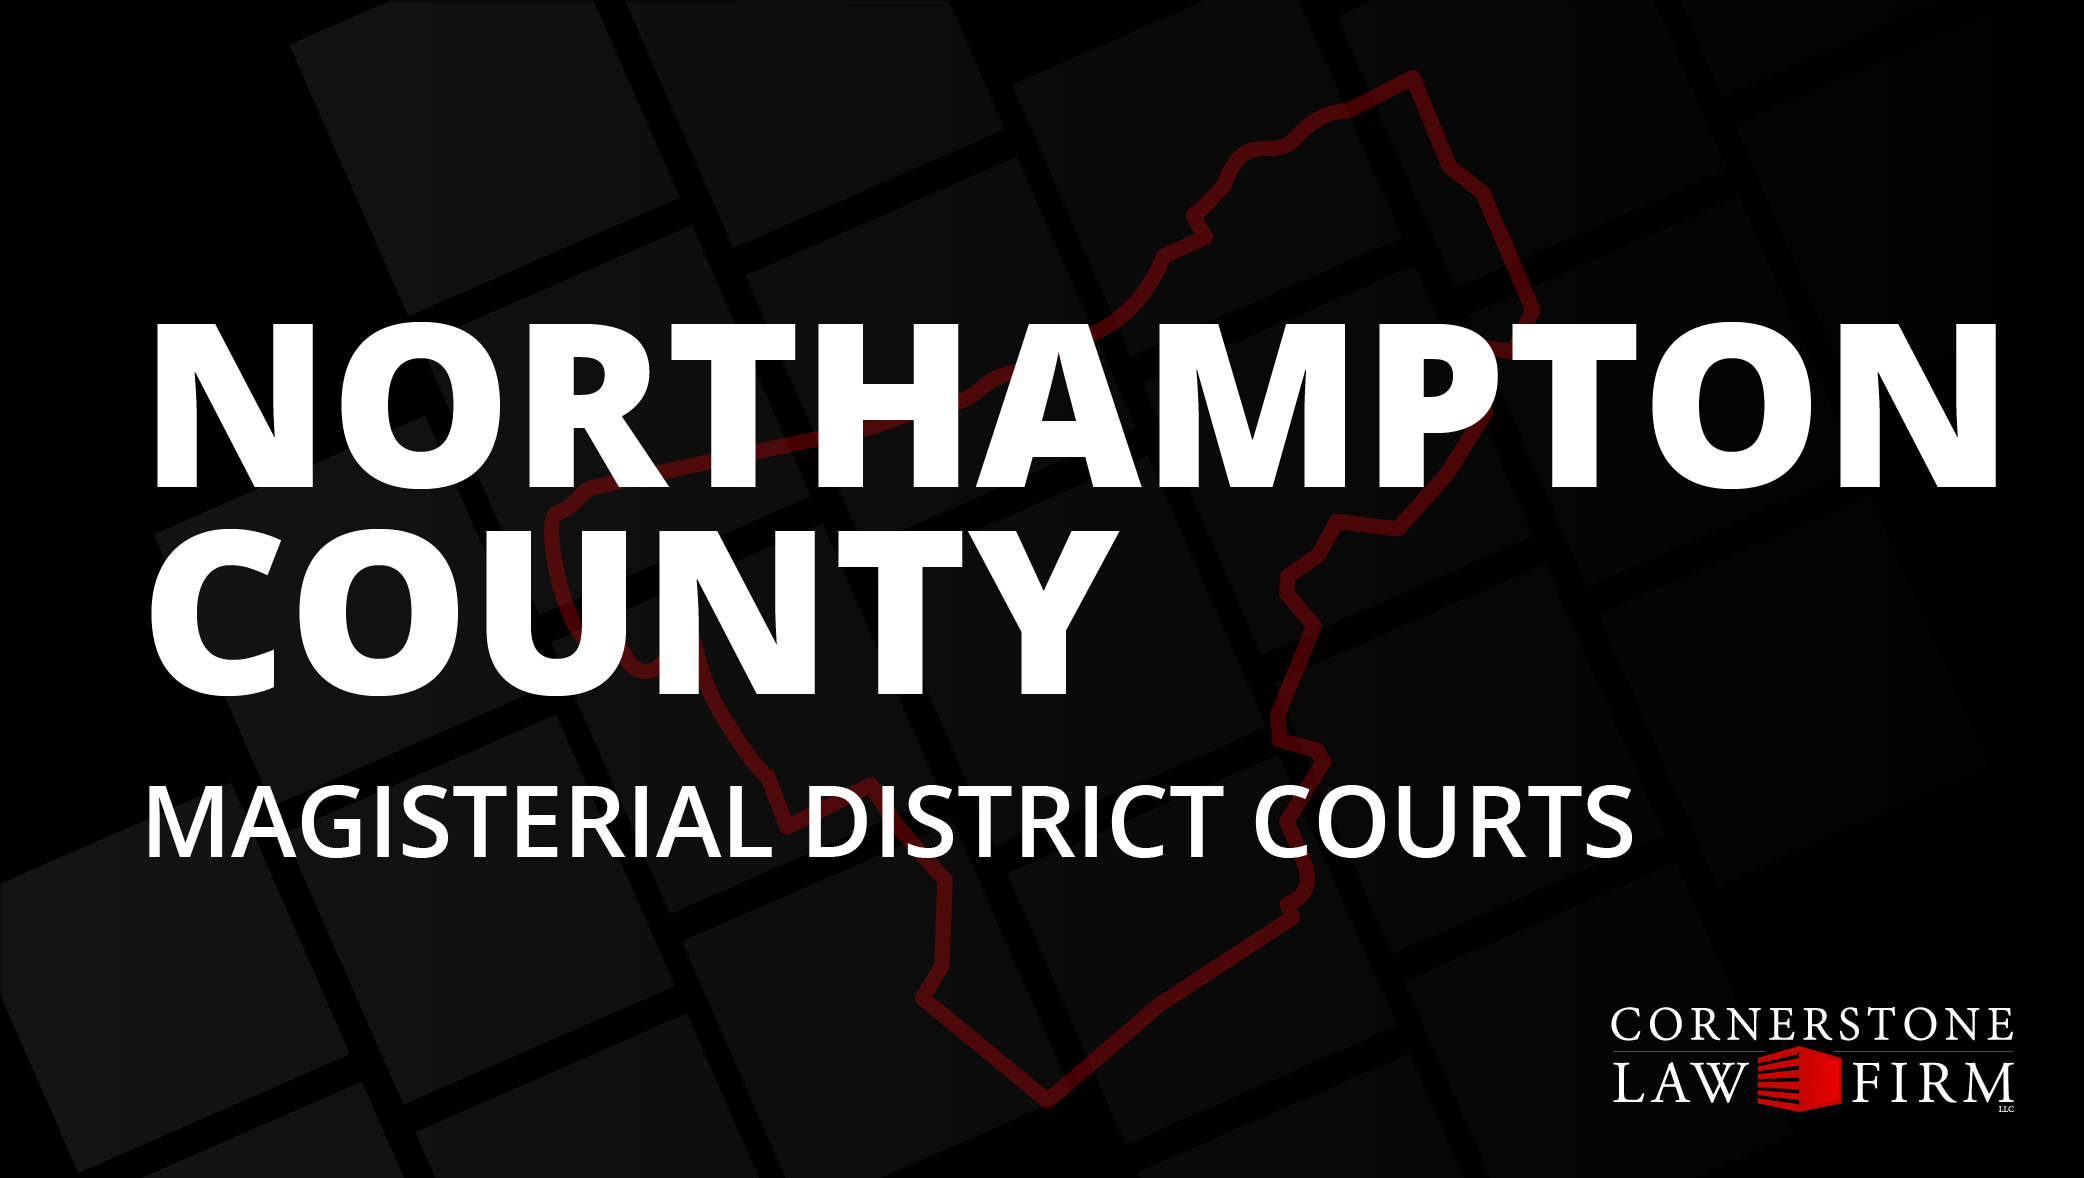 The words "Northampton County Magisterial District Courts" over a black background with a faded red outline of the county.